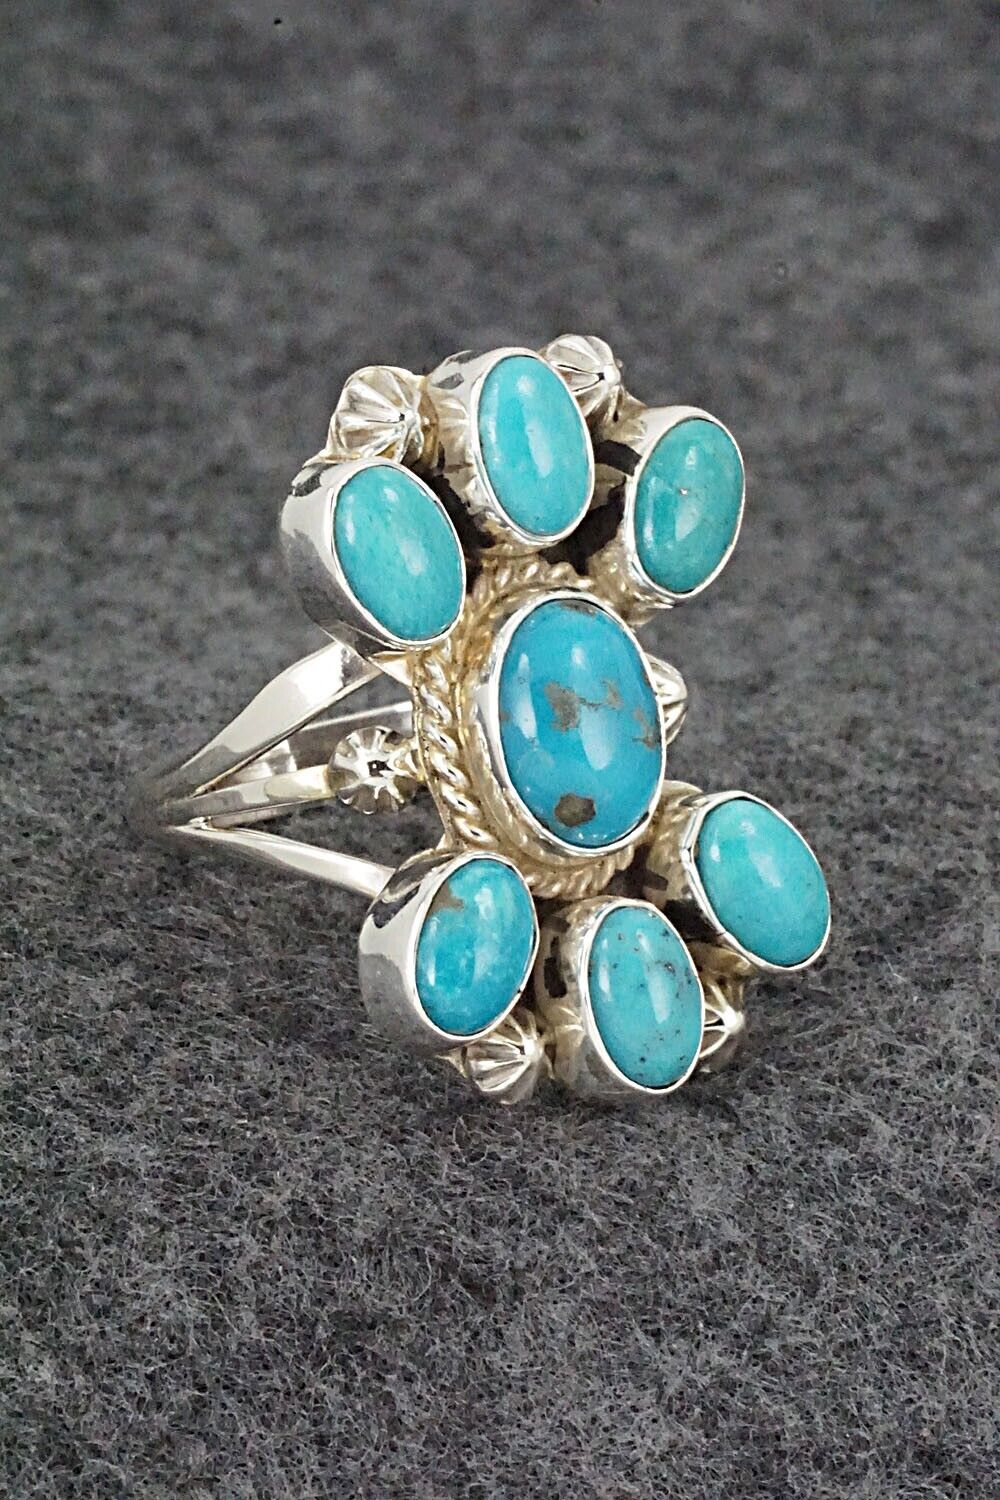 Turquoise & Sterling Silver Ring - Roberta Begay - Size 8